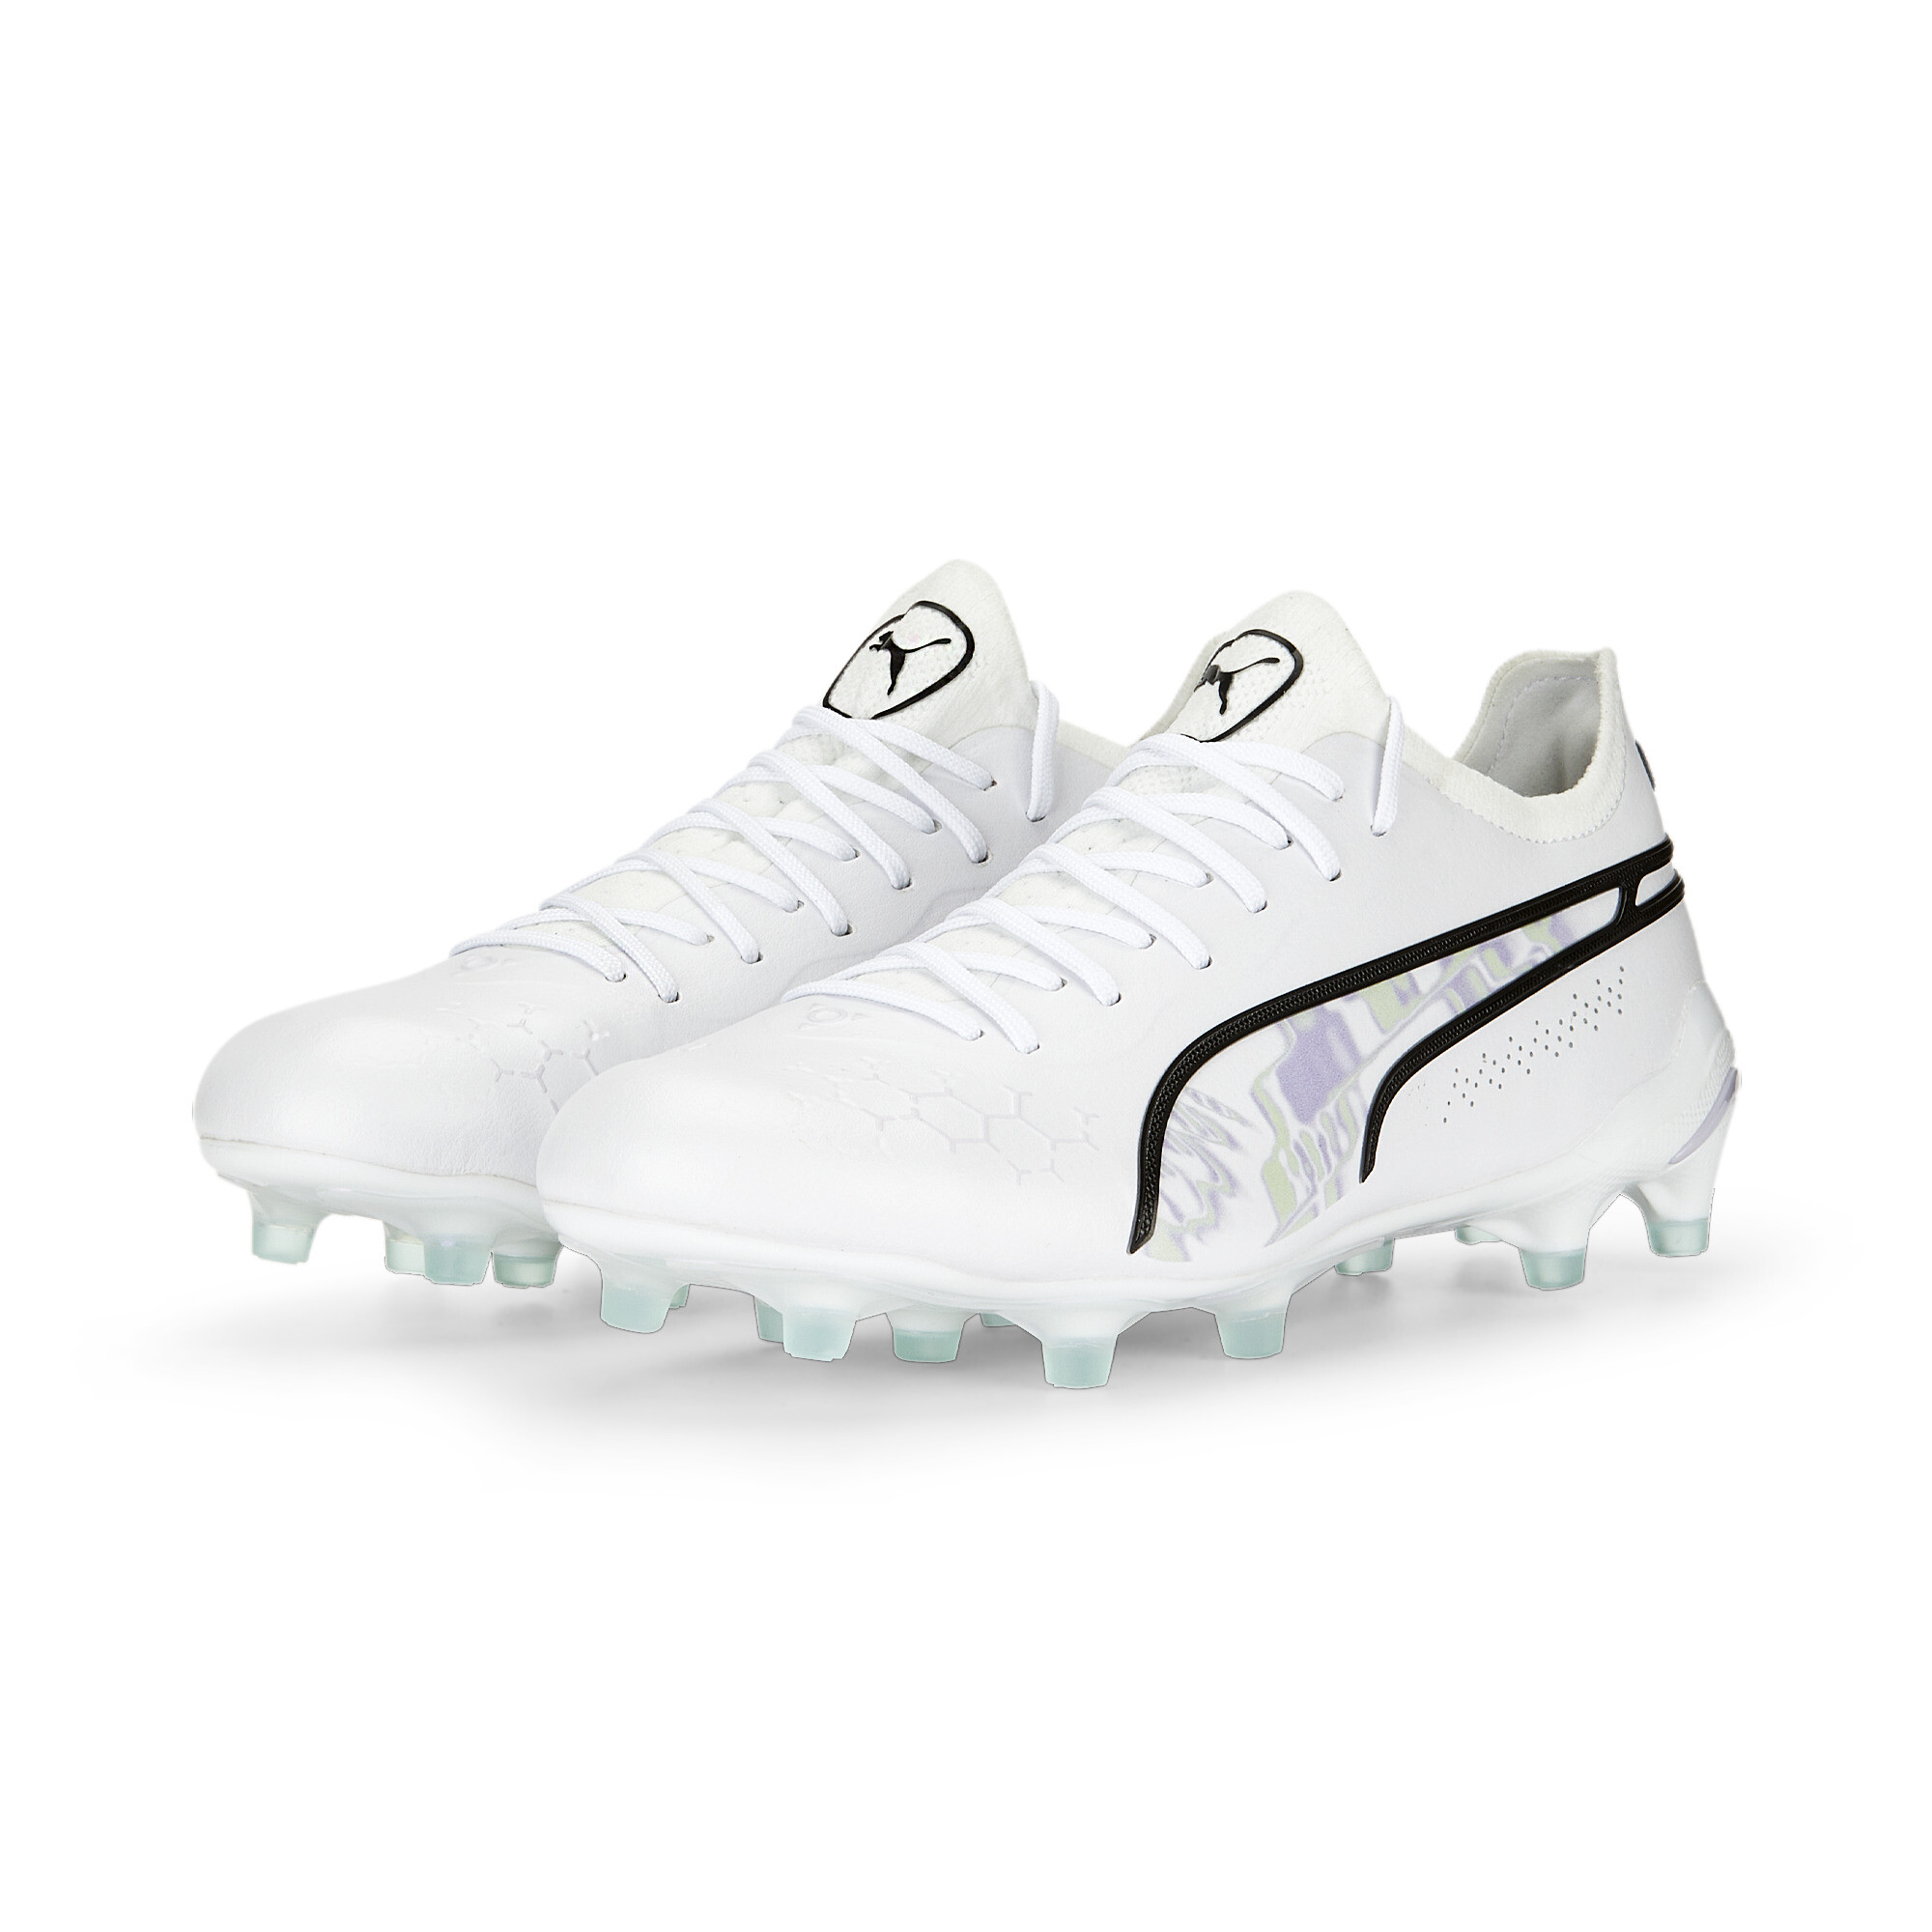 Women's Puma King Ultimate Brilliance FG/AG's Football Boots, White, Size 37.5, Shoes